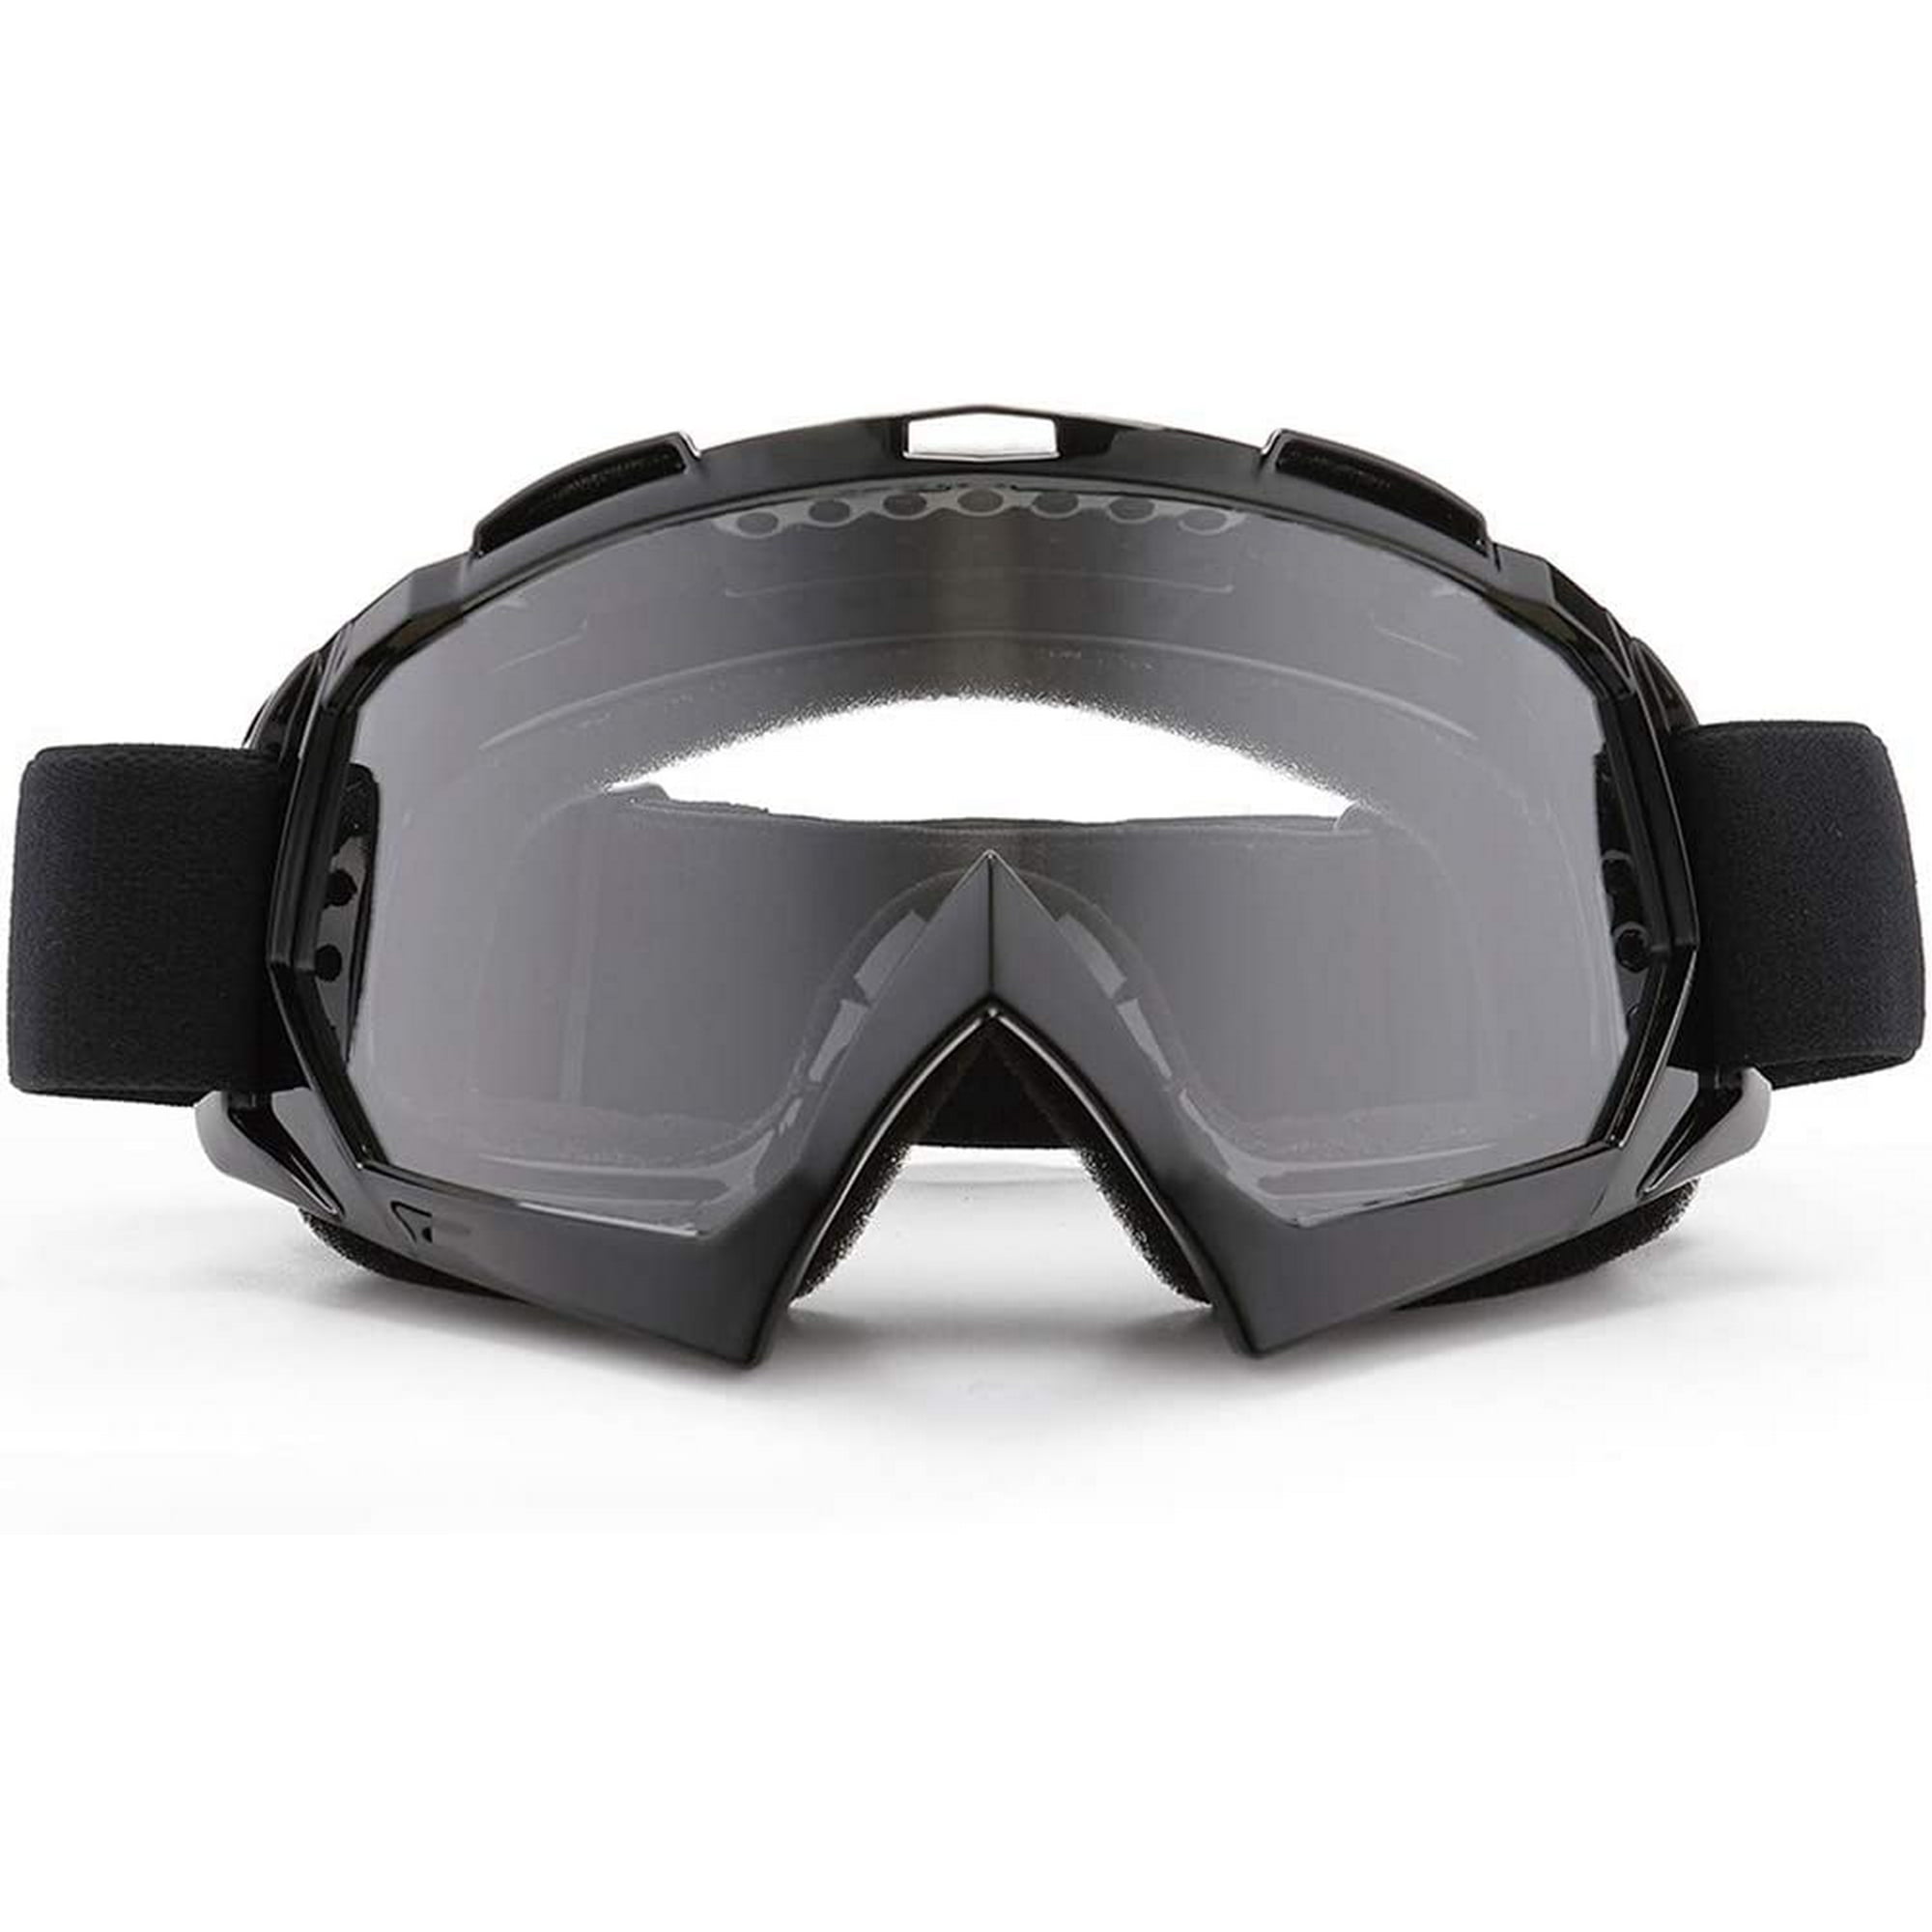 Motorcycle Goggles for Men Women Motocross Goggles ATV Goggles Windproof DirtBike Goggles Offroad Mx Goggles Youth Dustproof 